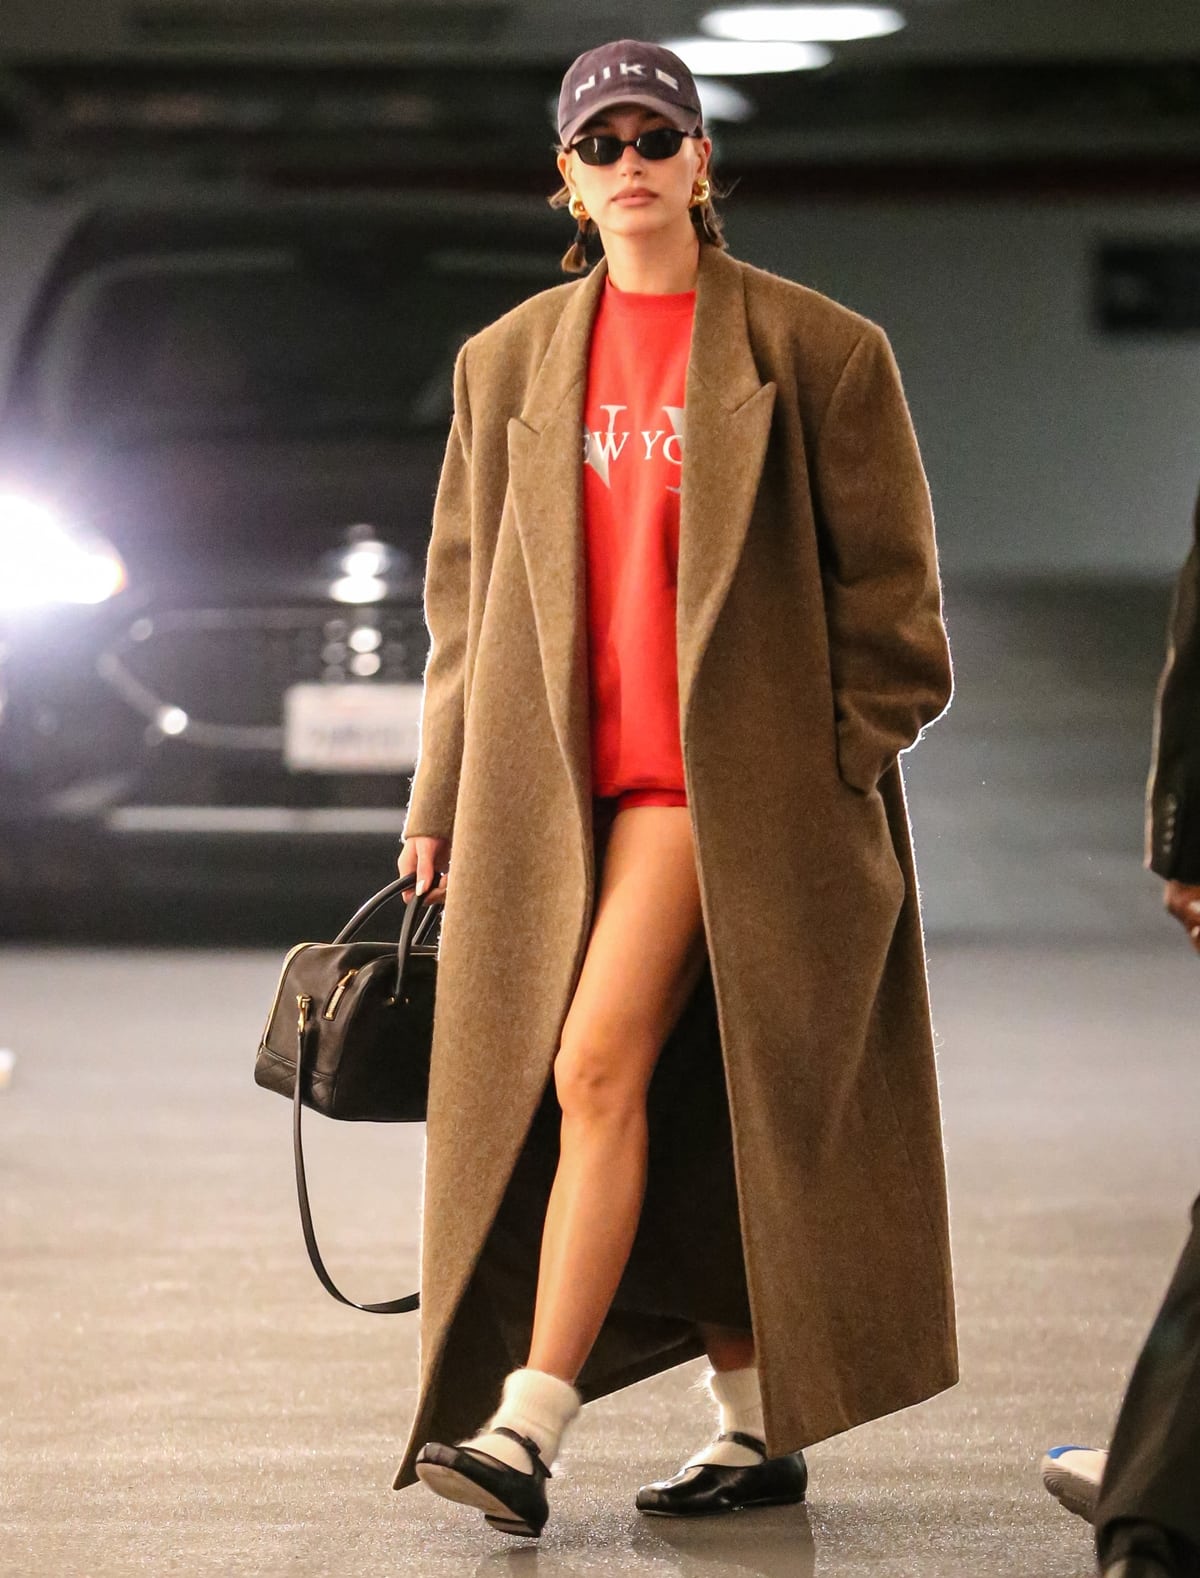 Hailey Bieber makes a bold statement in Beverly Hills with her vibrant red New York sweatshirt paired with ultra-short bicycle shorts, highlighting her toned legs